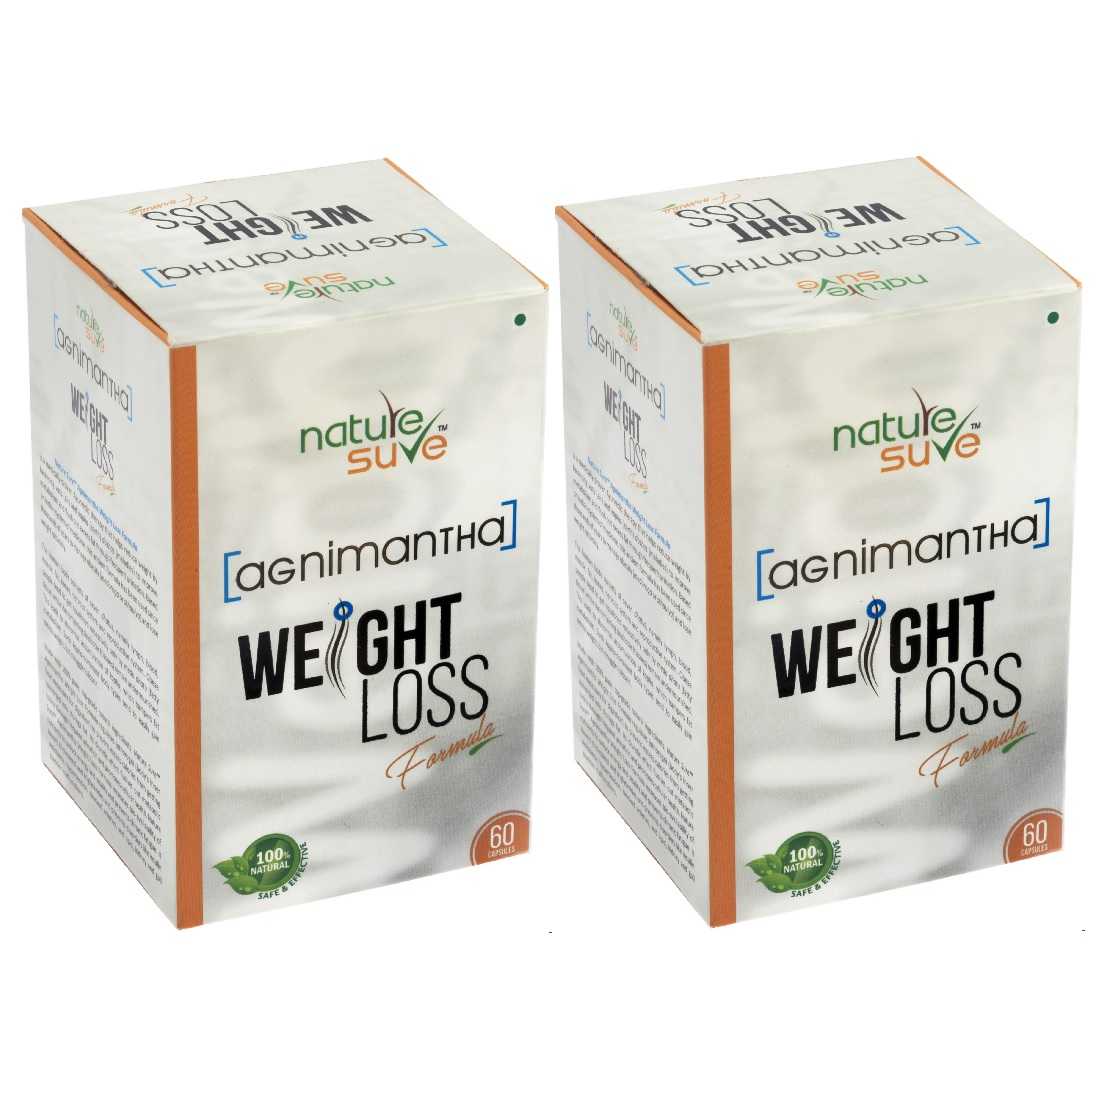 Nature Sure Pack of 2 Nature Sure Agnimantha Weight Loss Formula For Men and Women - 60 Capsules